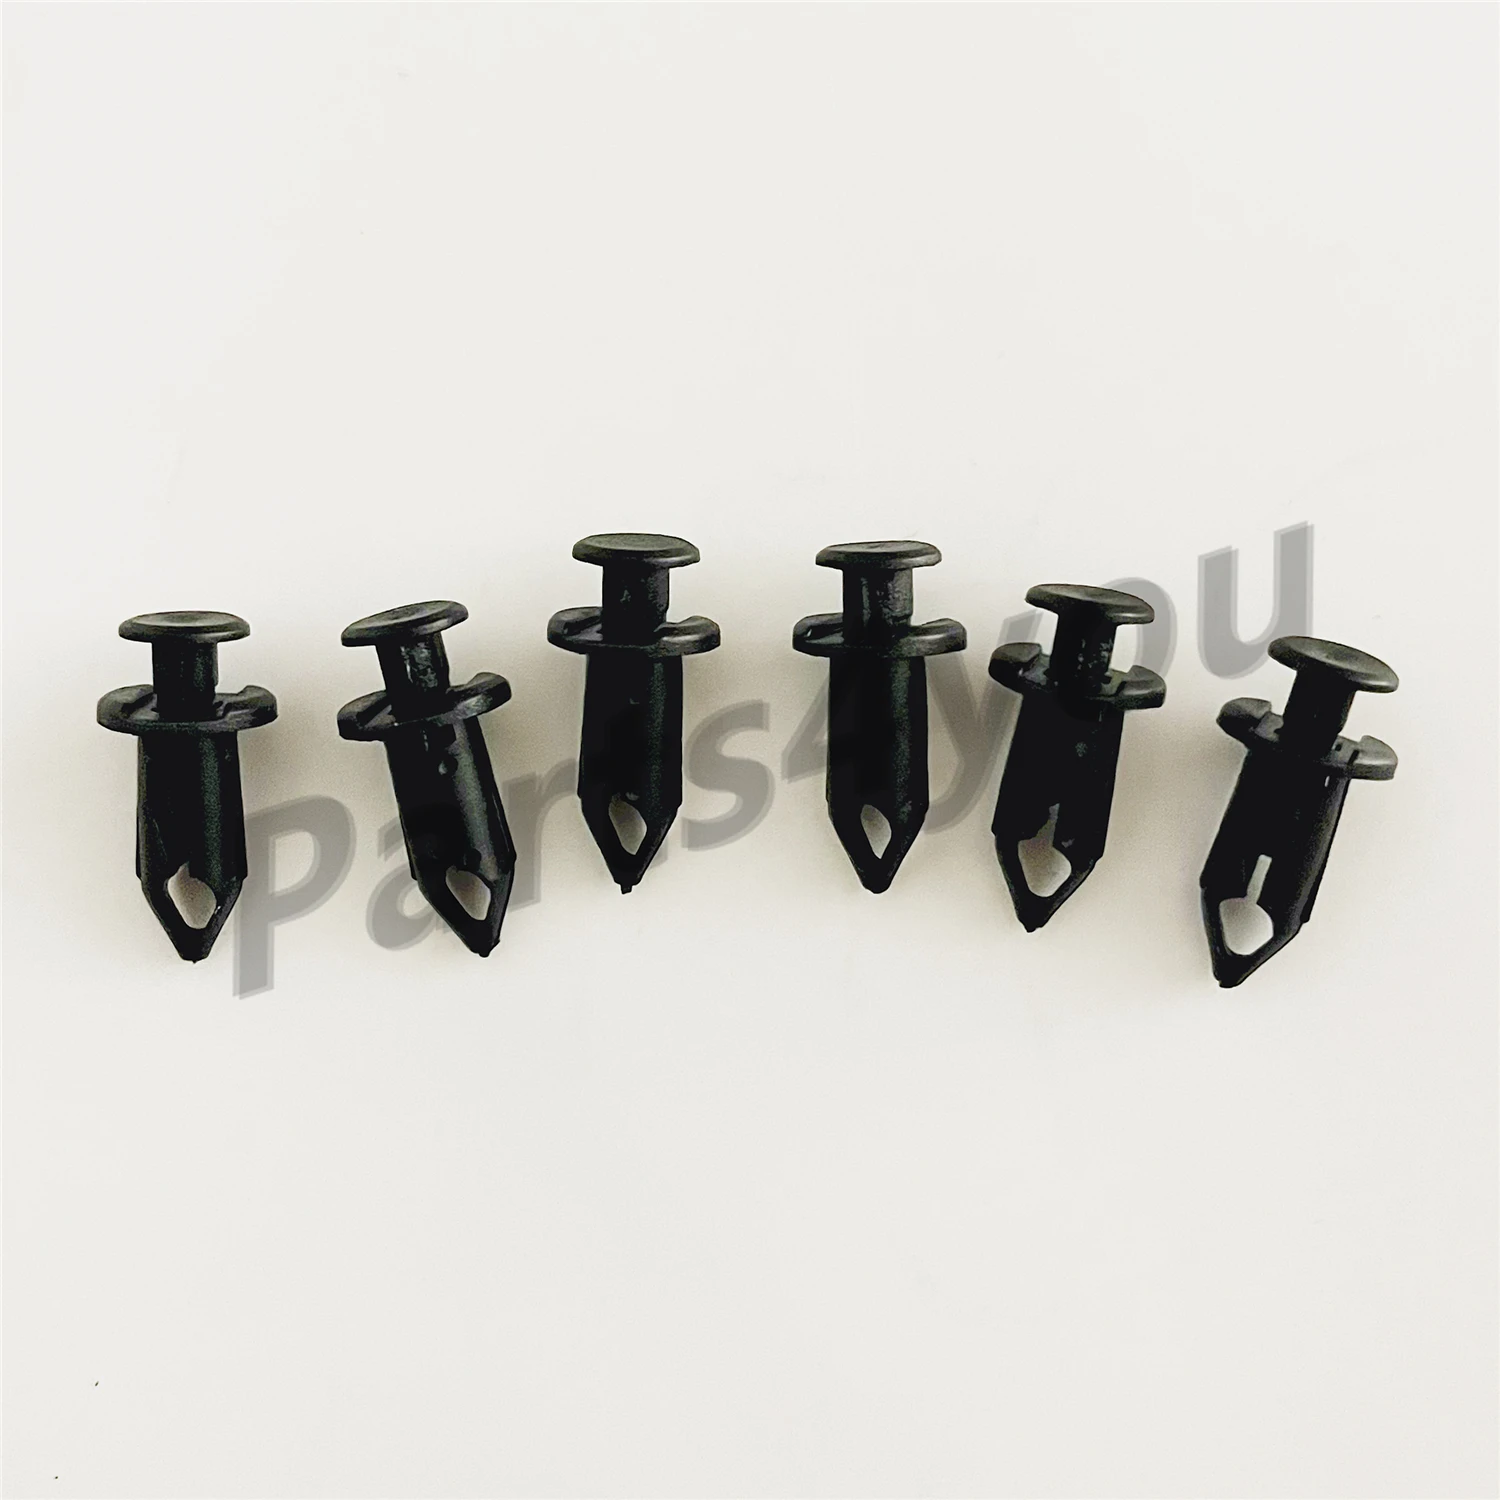 6PCS Cover Push Rivet Plastic Clip for CFMoto 110 125 250 300 400 450 500 520 525 600 625 650 700 800 820 1000 9060-040310 parts ignition switch knob cover push replacement switch plastic accessories for mazda cx 7 cx 9 speed 6